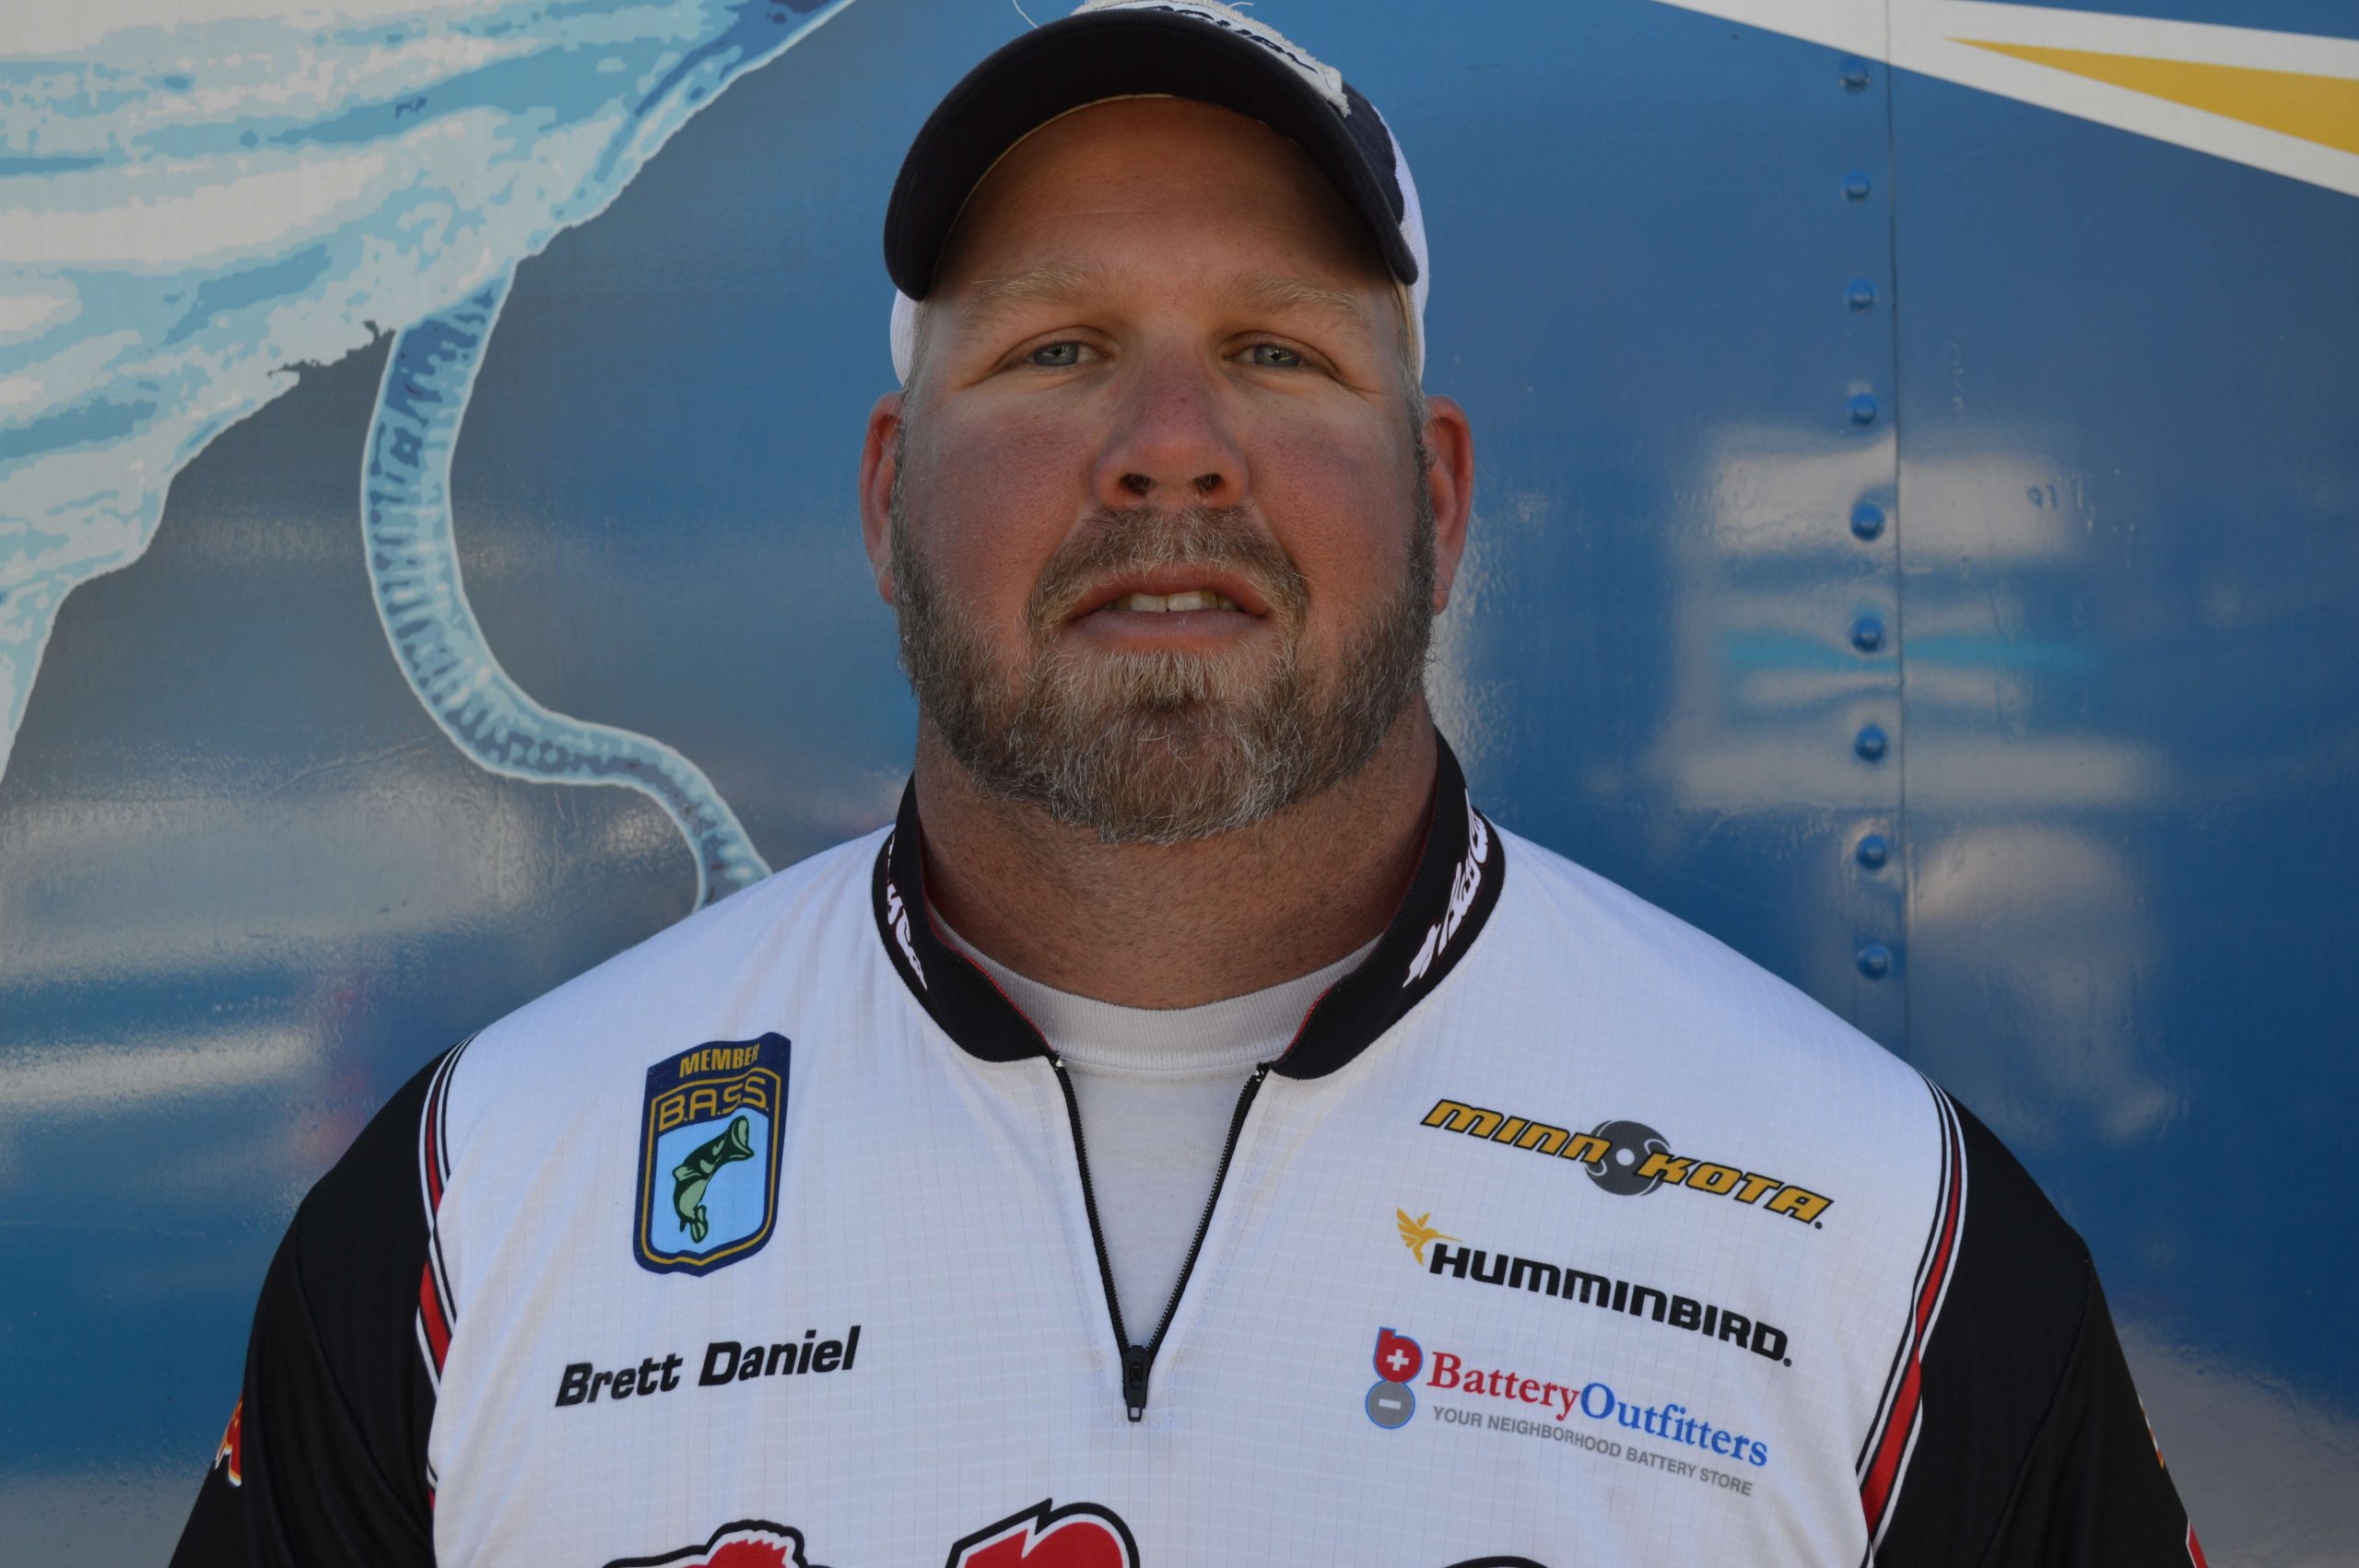 <h4>Brett Daniel</h4>
Arkansas Nonboater<br>
B.A.S.S. Nation Club: Natural State Bass Anglers<BR>
Occupation:  Crane operator<BR>
Hobbies: Hunting, kayaking<BR>
Sponsors: Power-Pole, Bass Cat
